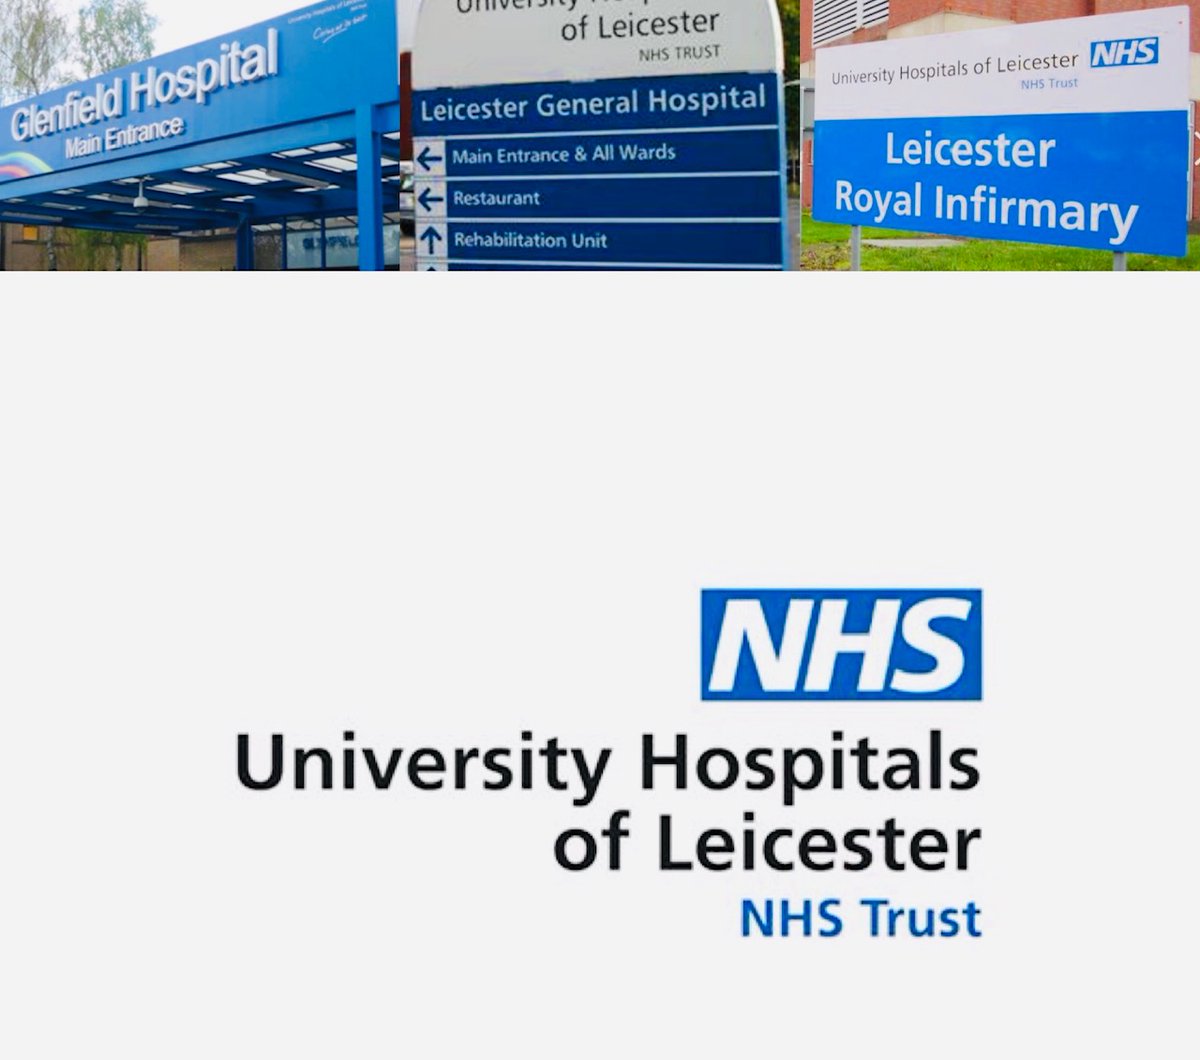 Come and Join us! Applications are invited for enthusiastic and highly motivated Locum Consultant and substantive Consultant in Intensive care medicine to join our expanding team. jobs.nhs.uk/xi/vacancy/916… jobs.nhs.uk/xi/vacancy/916…